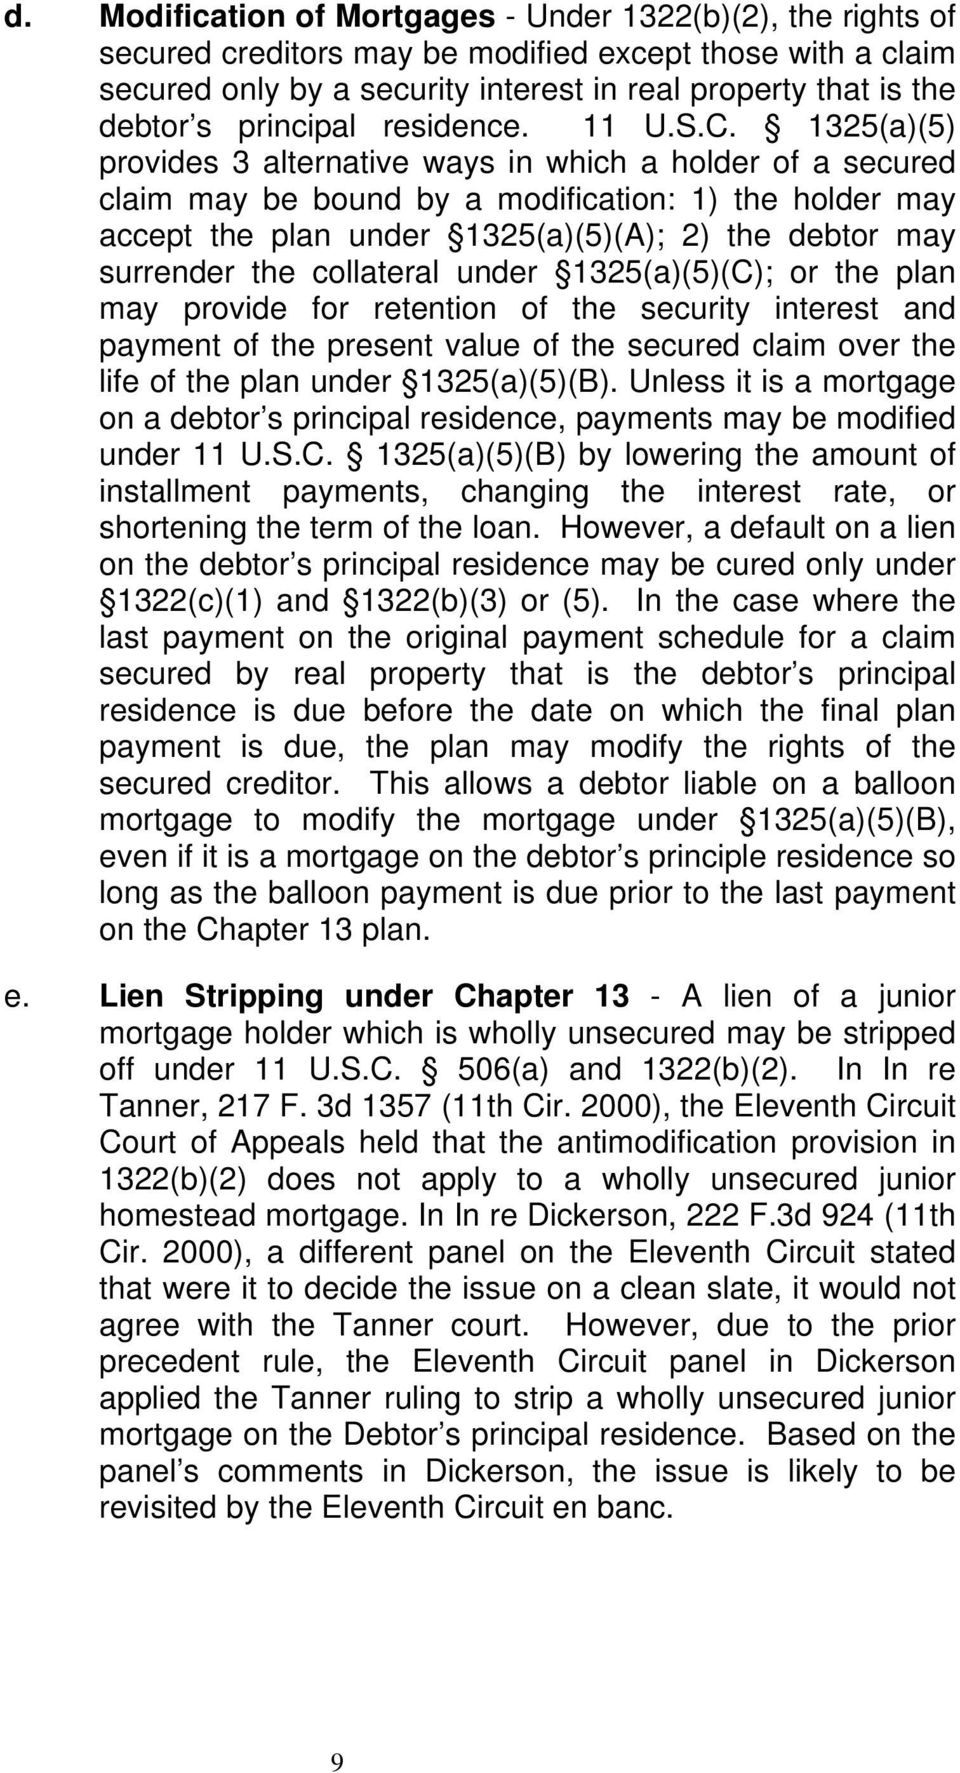 1325(a)(5) provides 3 alternative ways in which a holder of a secured claim may be bound by a modification: 1) the holder may accept the plan under 1325(a)(5)(A); 2) the debtor may surrender the